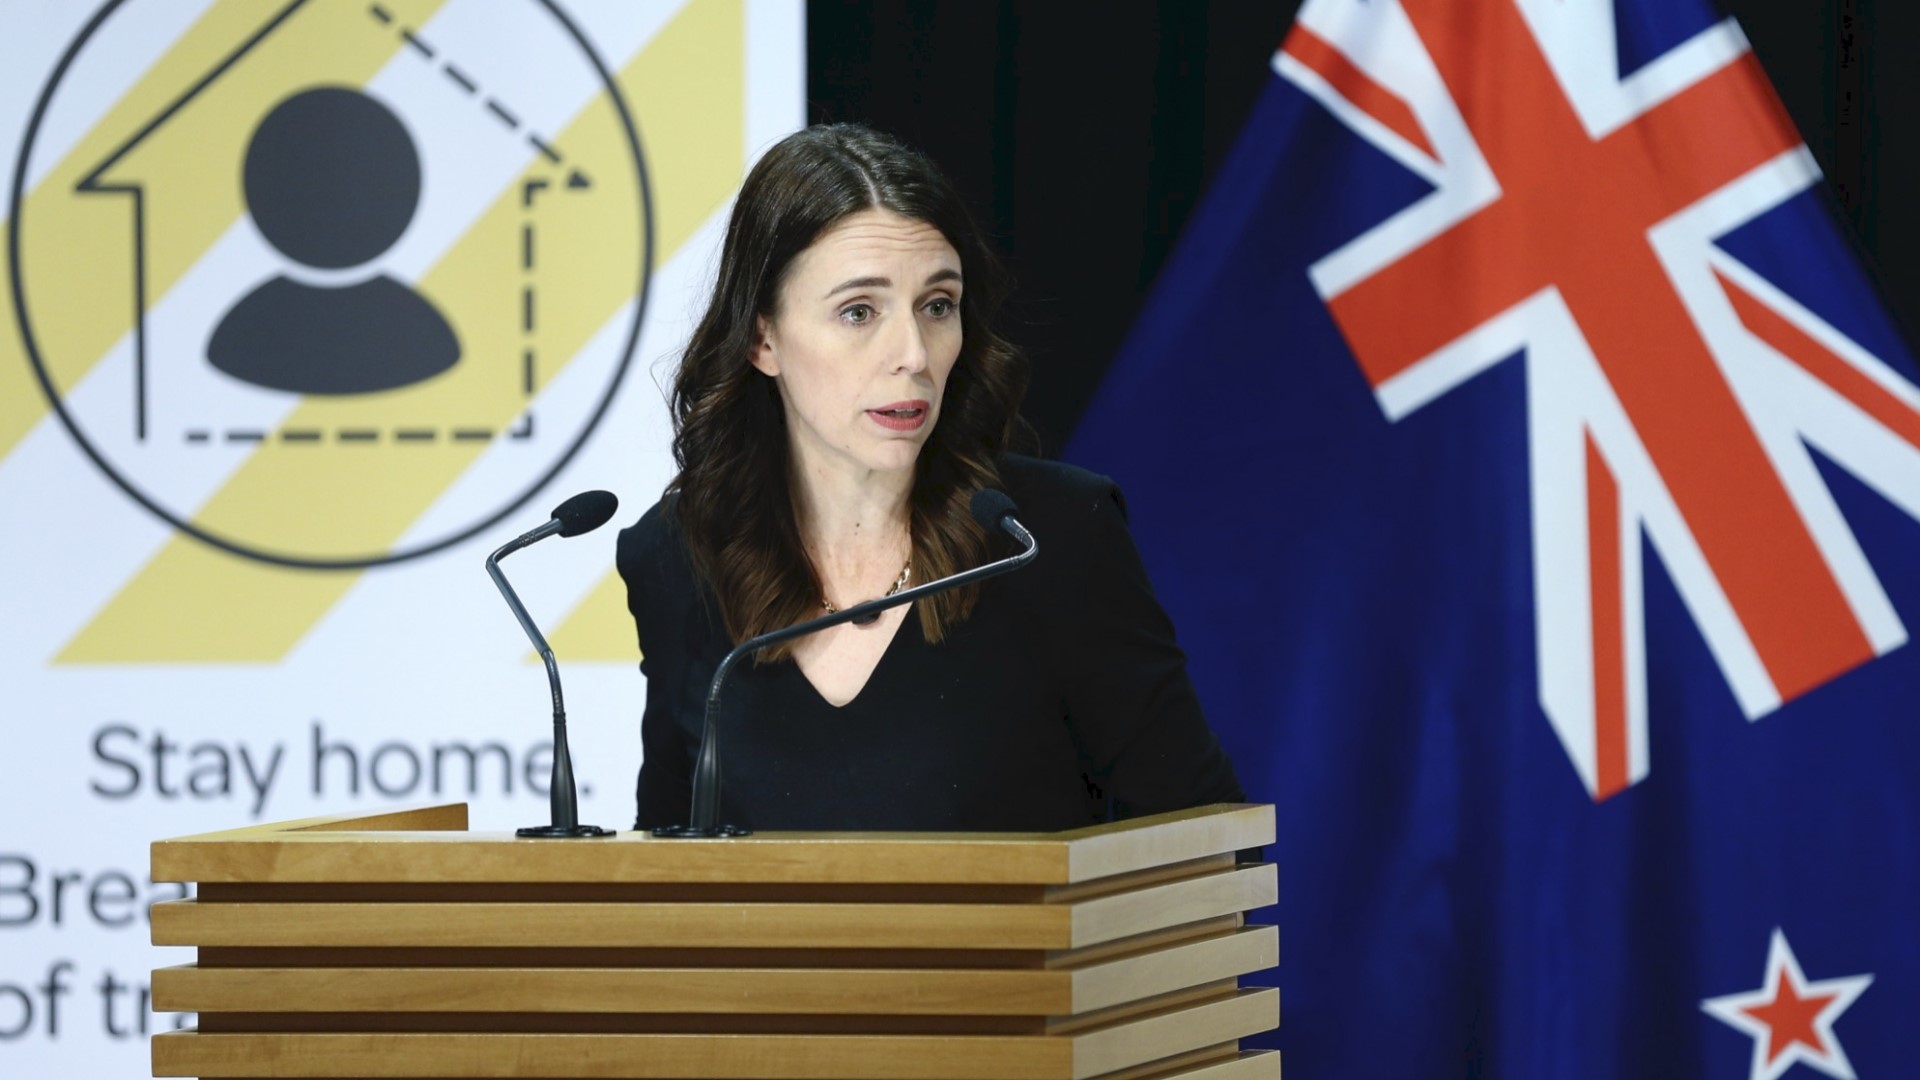 New Zealand's Prime Minister Jacinda Ardern is the youngest female head of government in the world. At 39 years old she has made a name for herself around the globe. And amid her country's level four lockdown due to the coronavirus, she confirmed that she and her ministers and other public chief executives will take a 20% pay cut for the next 6 months. Veuer's Nick Cardona has that story.